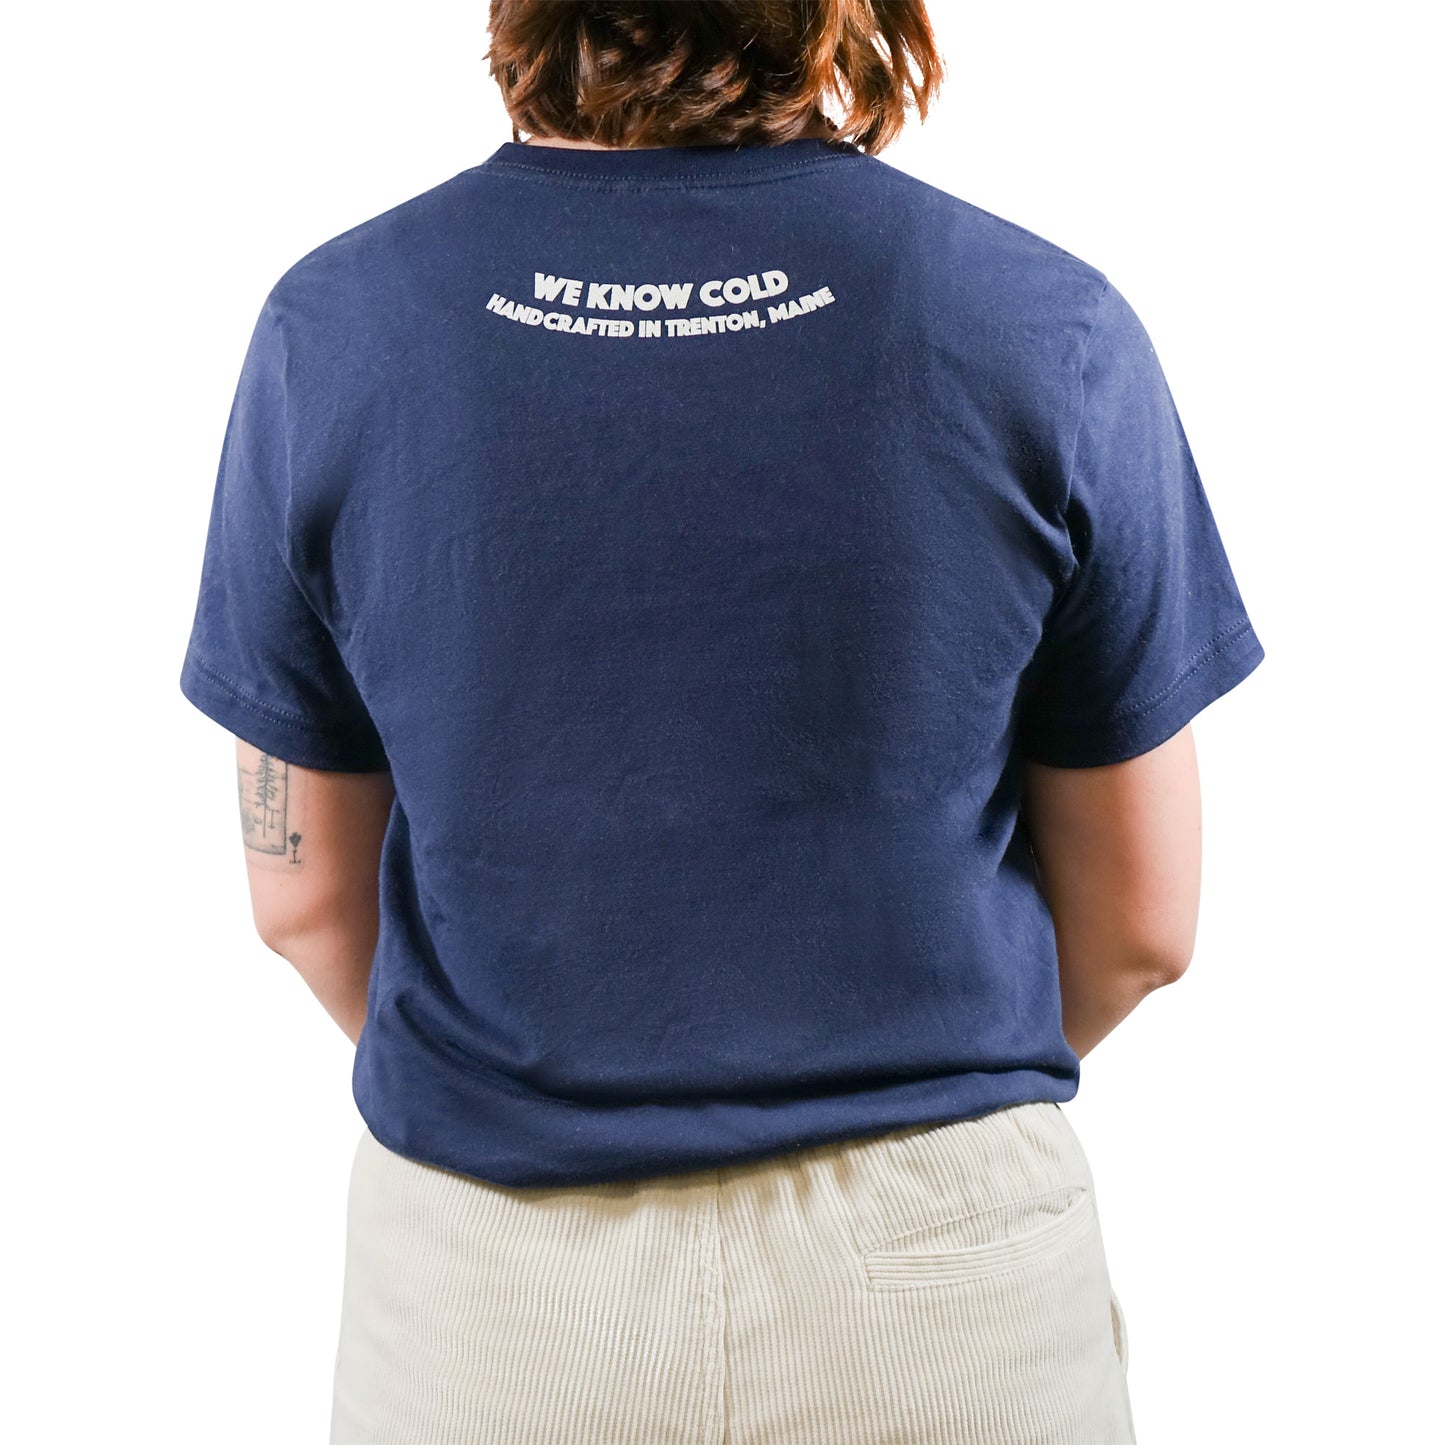 The back of a woman wearing a Mainers Cotton Tee that says god works.